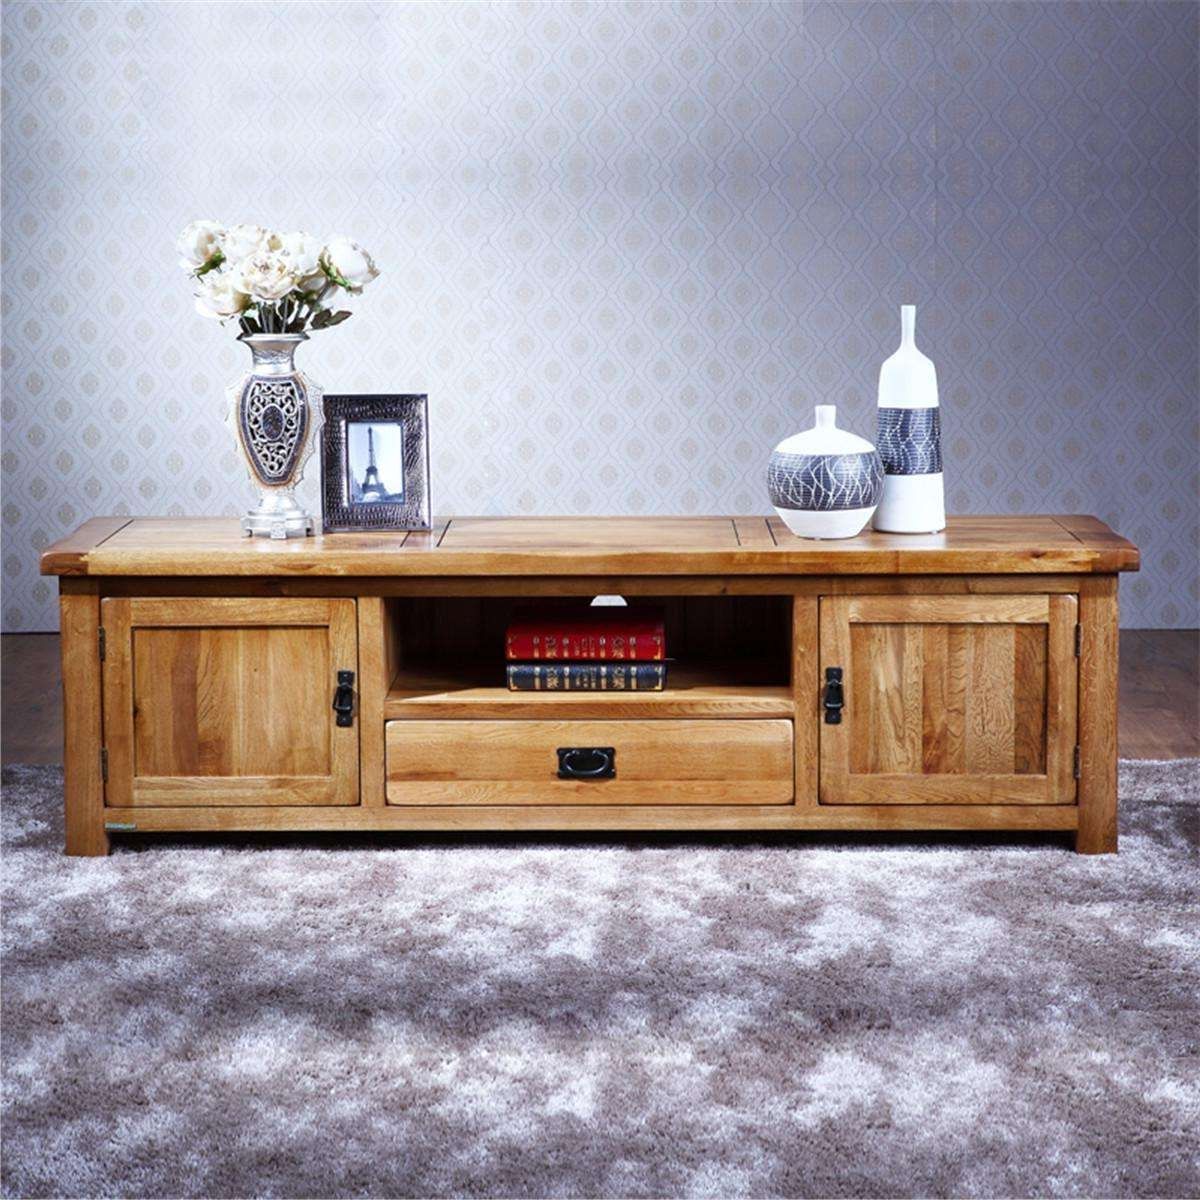 Pure Solid Wood Tv Stand Oak Media Console Inspirations Decoration In Wooden Tv Cabinets (View 4 of 20)